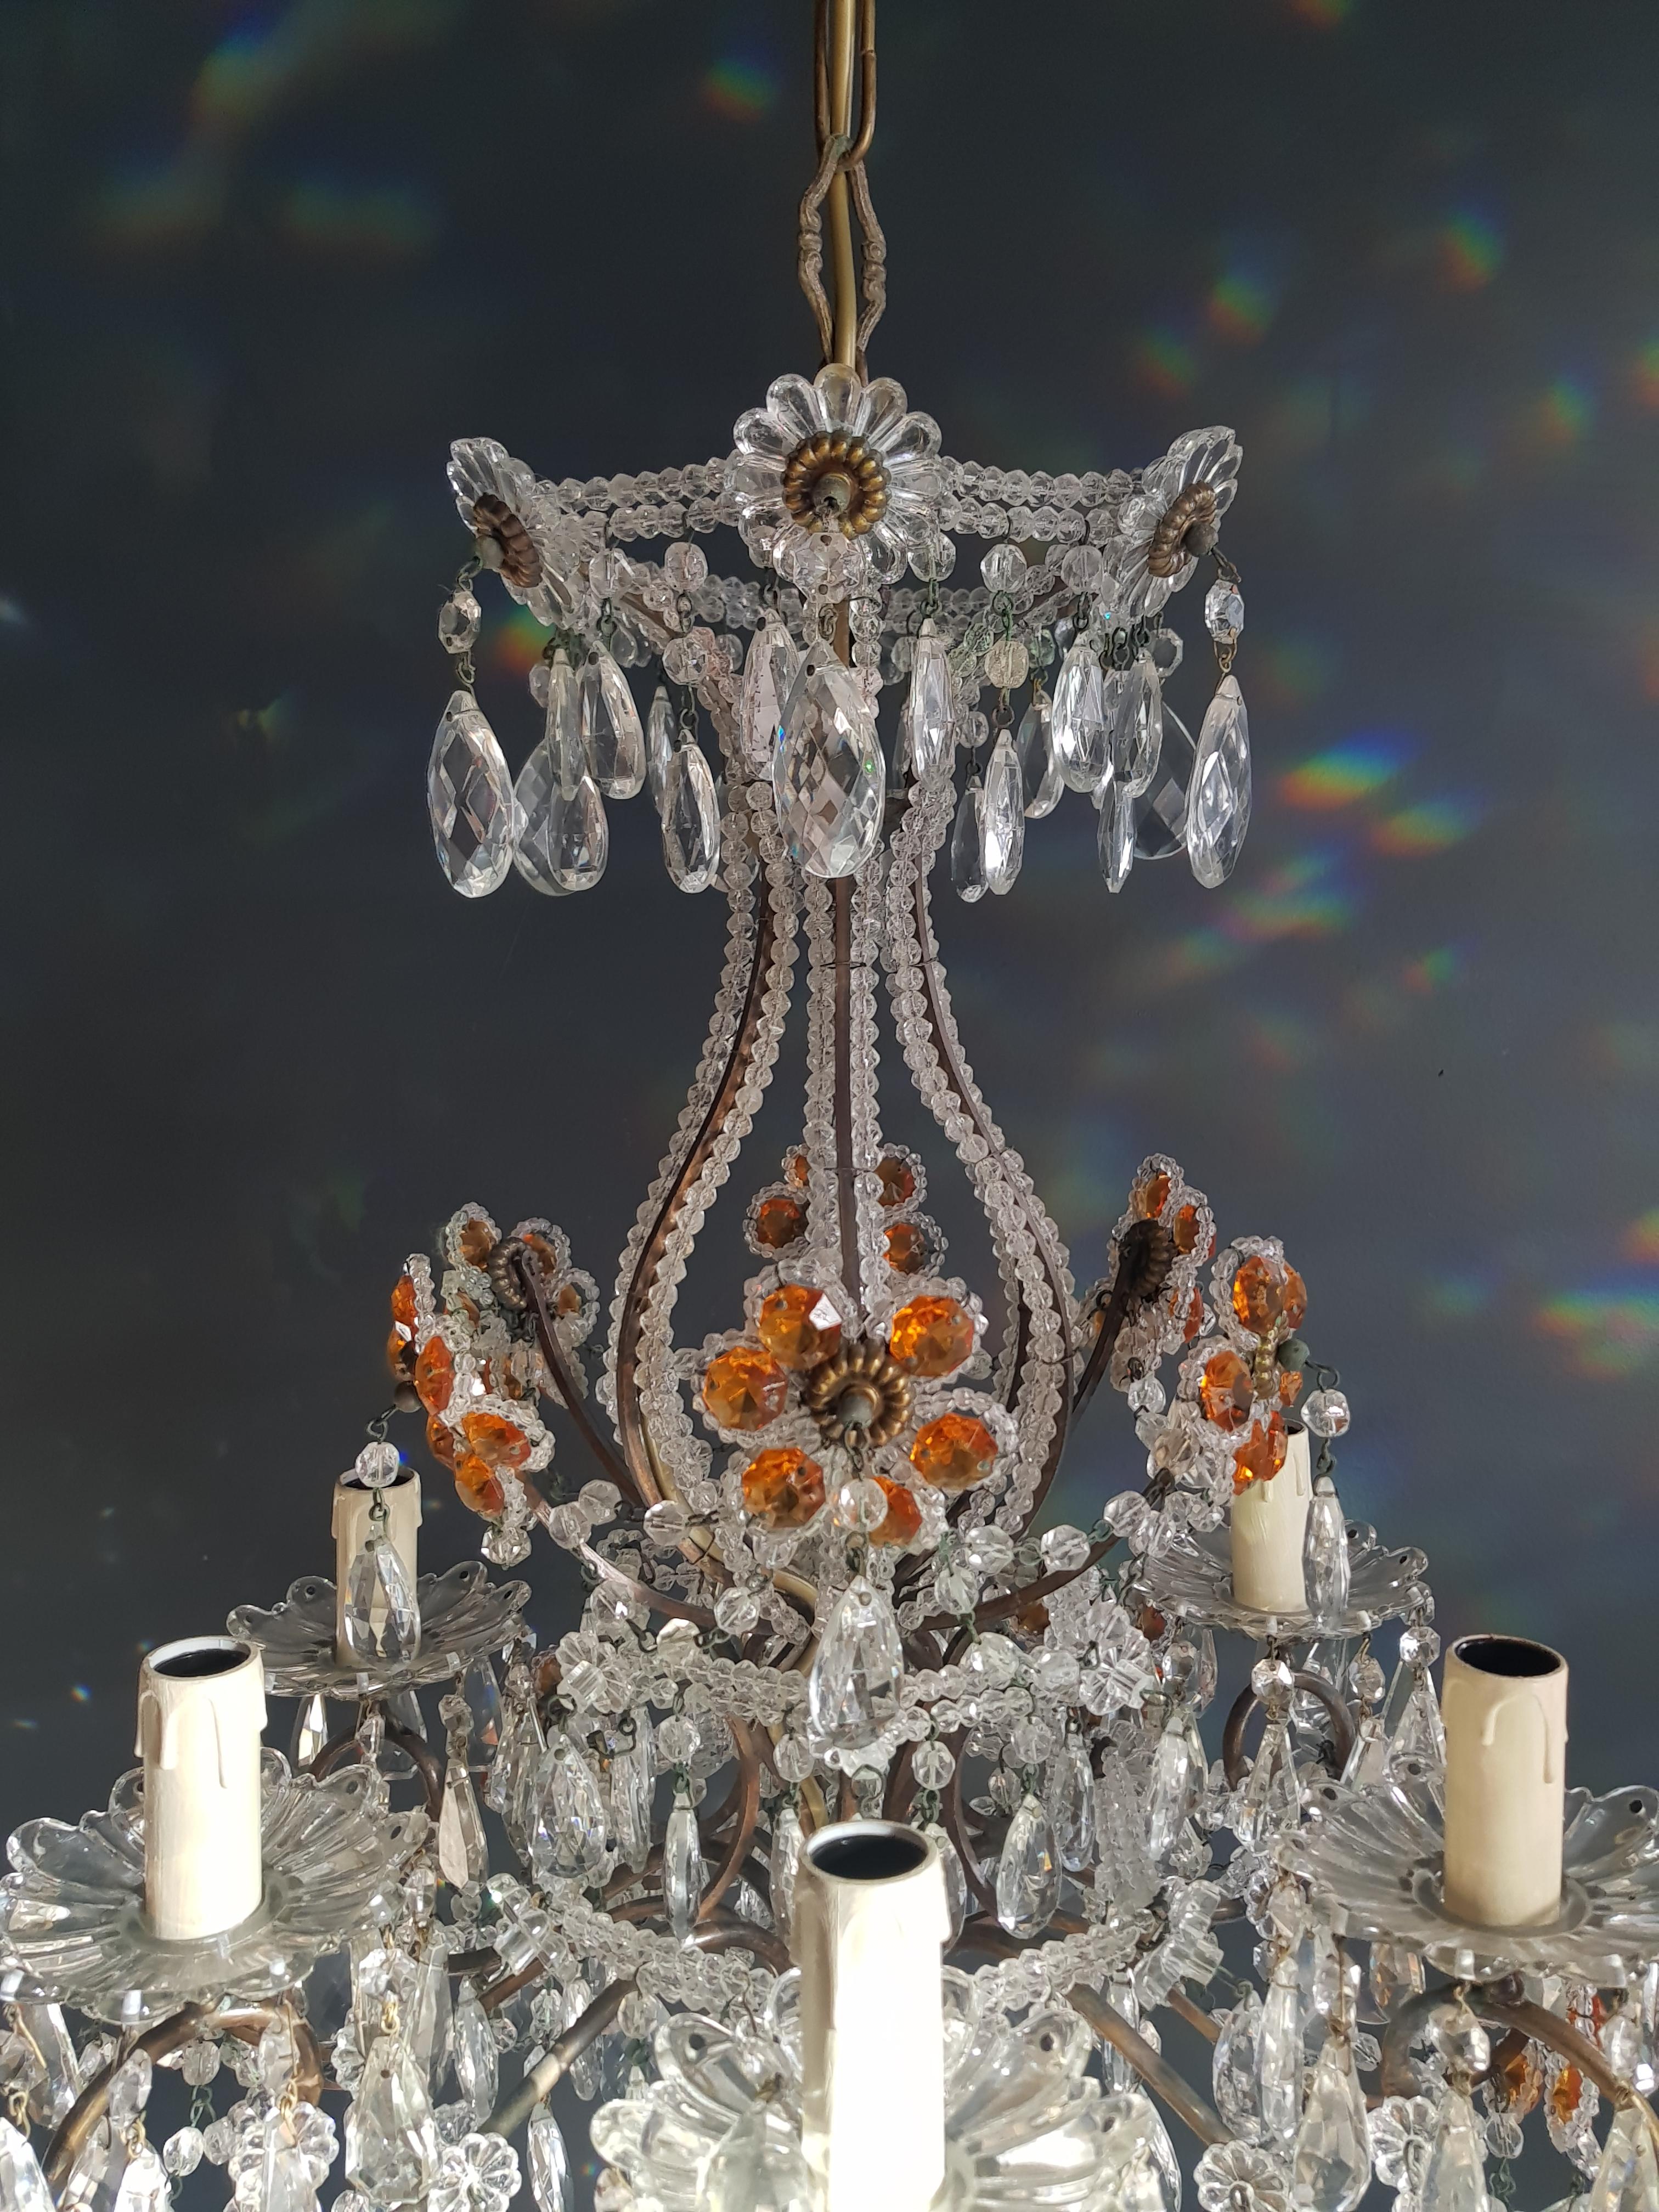 Hand-Crafted Amber Crystal Antique Chandelier Ceiling Murano Florentiner Lustre Art Nouveau 